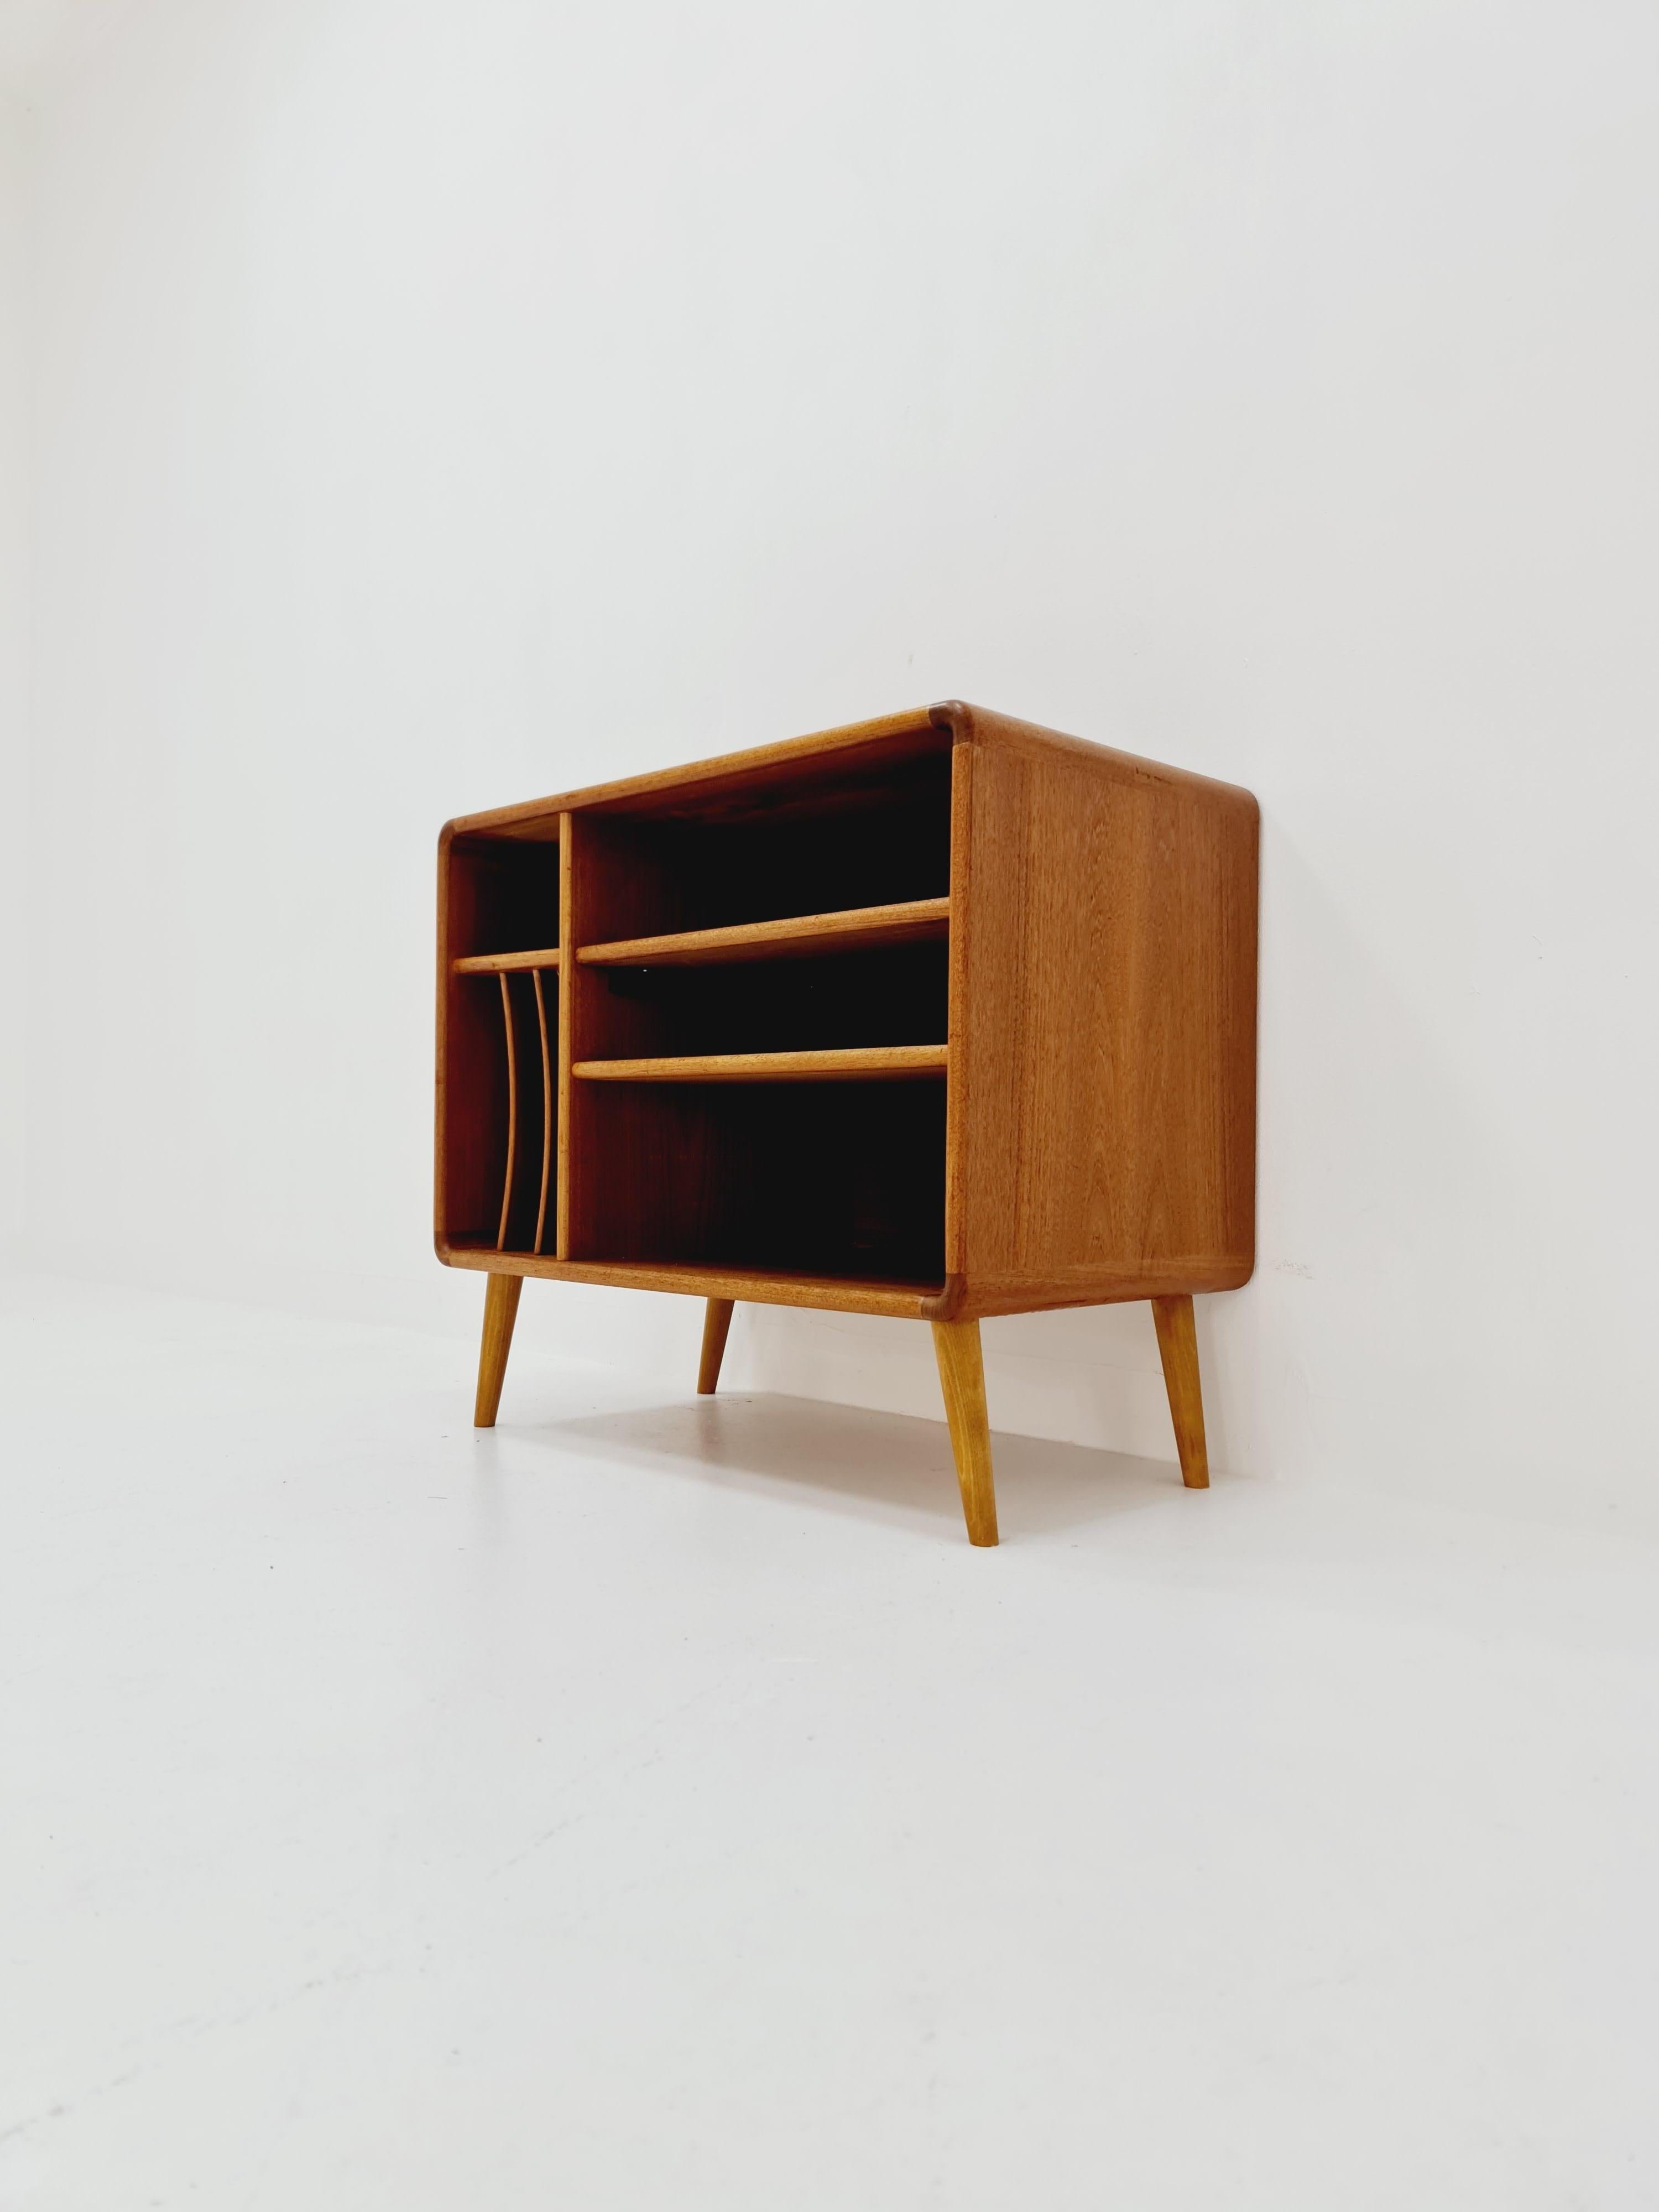 Vintage Danish teak record cabinet sideboard By Salin Möbler , 1960s

Dimensions: 
50 D x 86 W x 75 H cm

It is in great condition, however, as with all vintage items some minor wear marks should be expected.

Please inquiry for prices to your